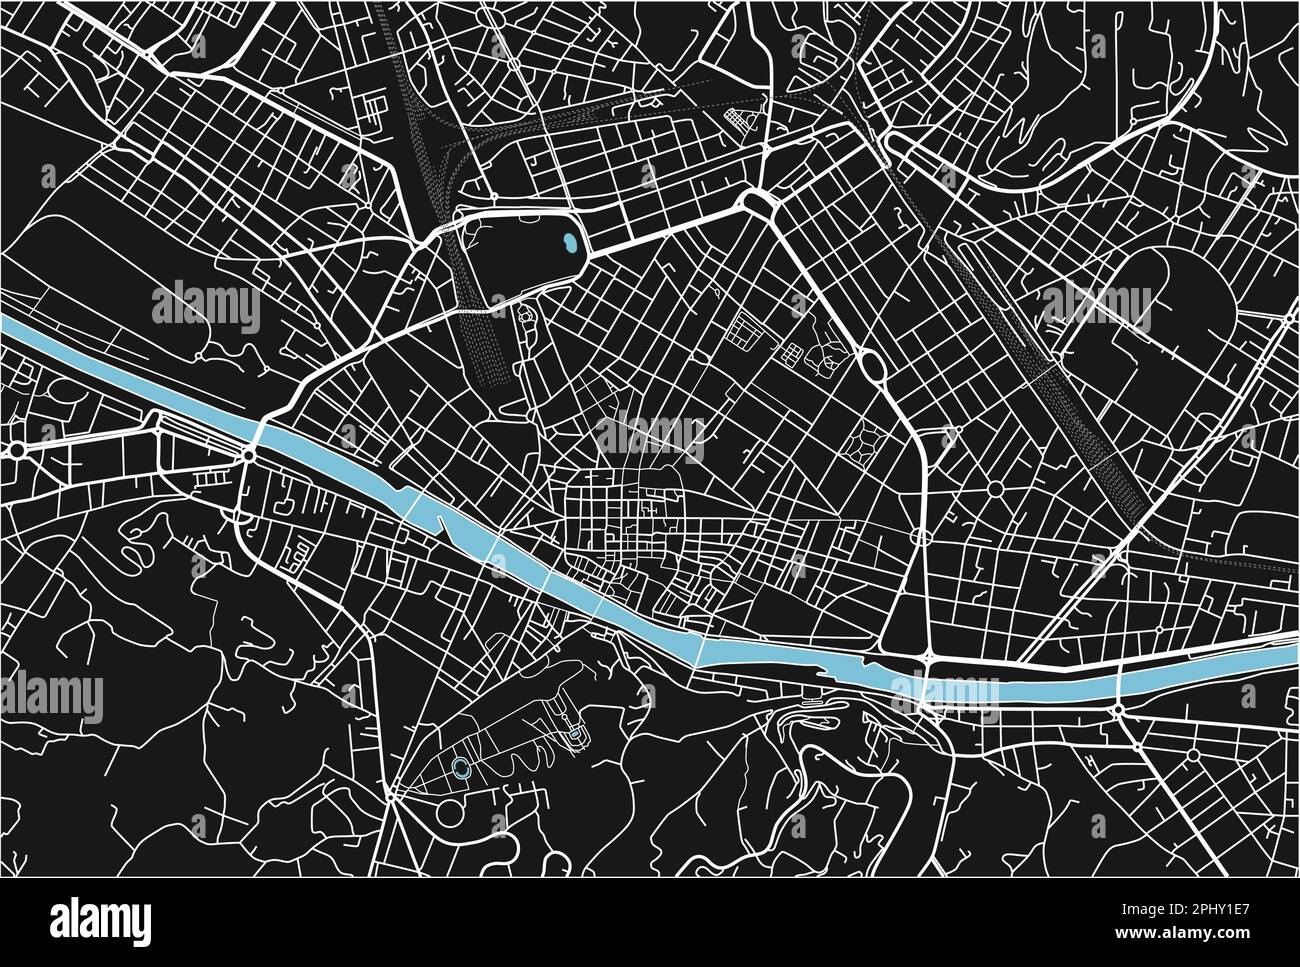 Black and white vector city map of Florence with well organized separated layers. Stock Vector